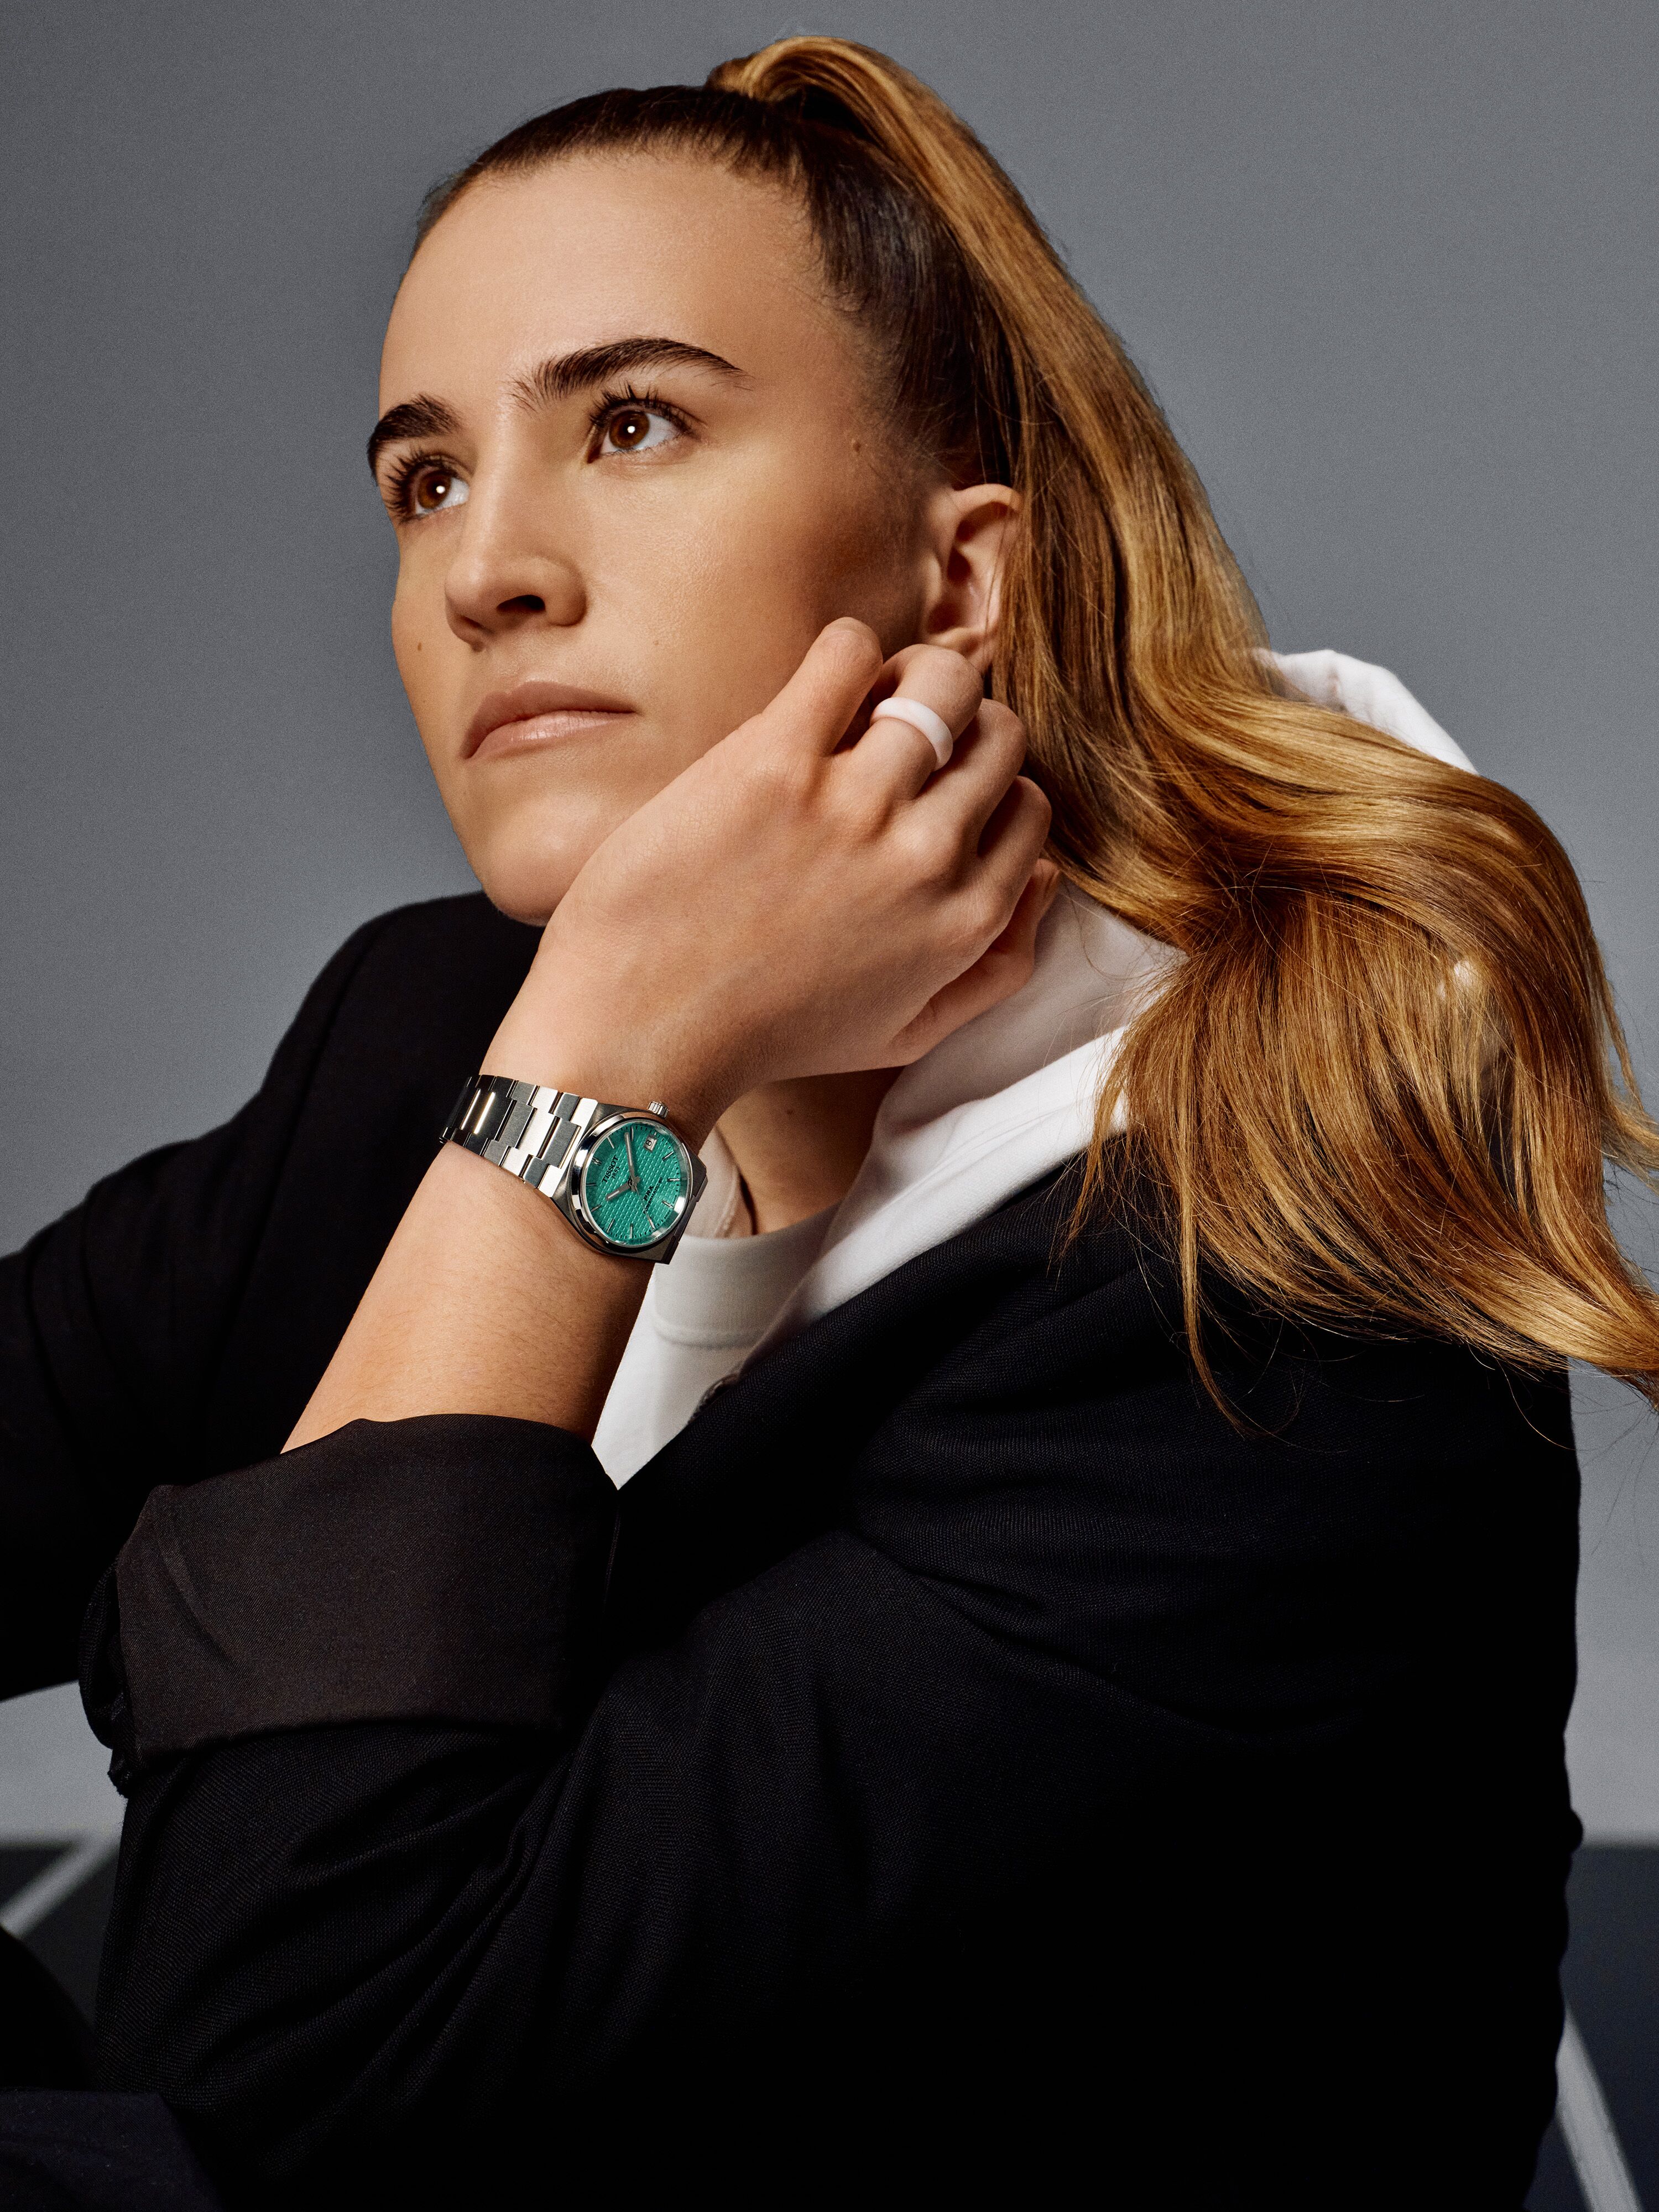 Portrait of new Tissot ambassador Sabrina Ionescu wearing the Tissot PRX Powermatic 80 with mint dial on her wrist.